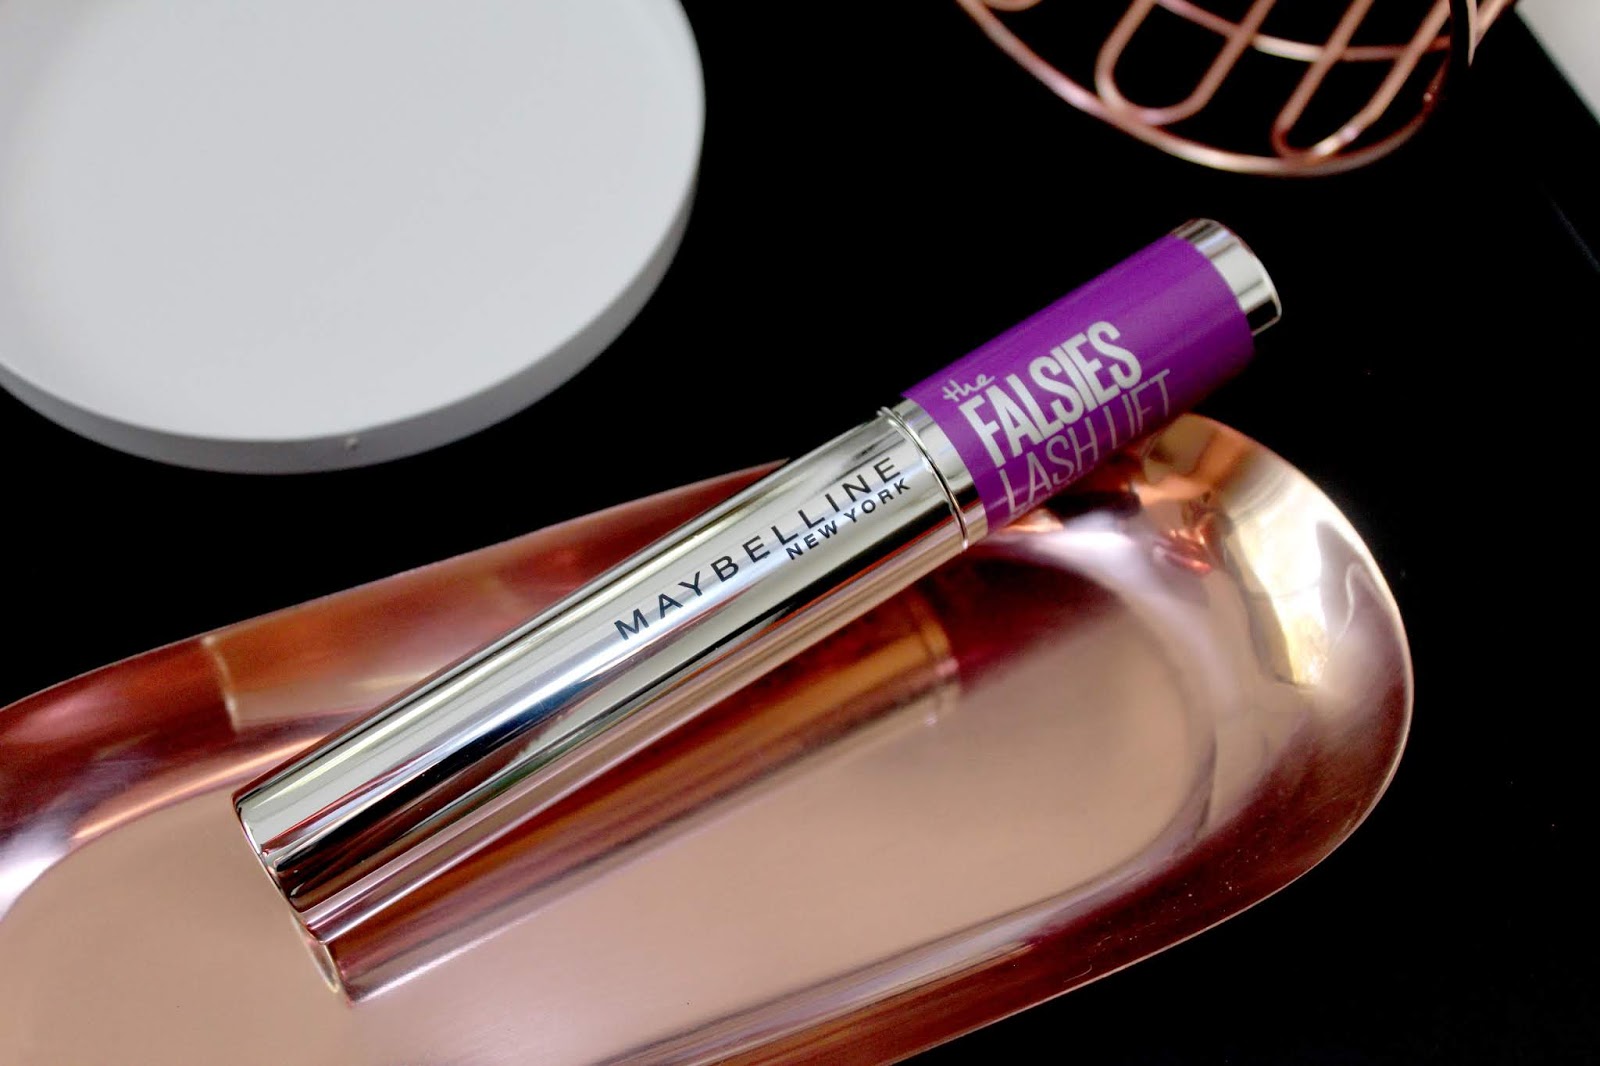 Review: Maybelline The Falsies Lash Lift